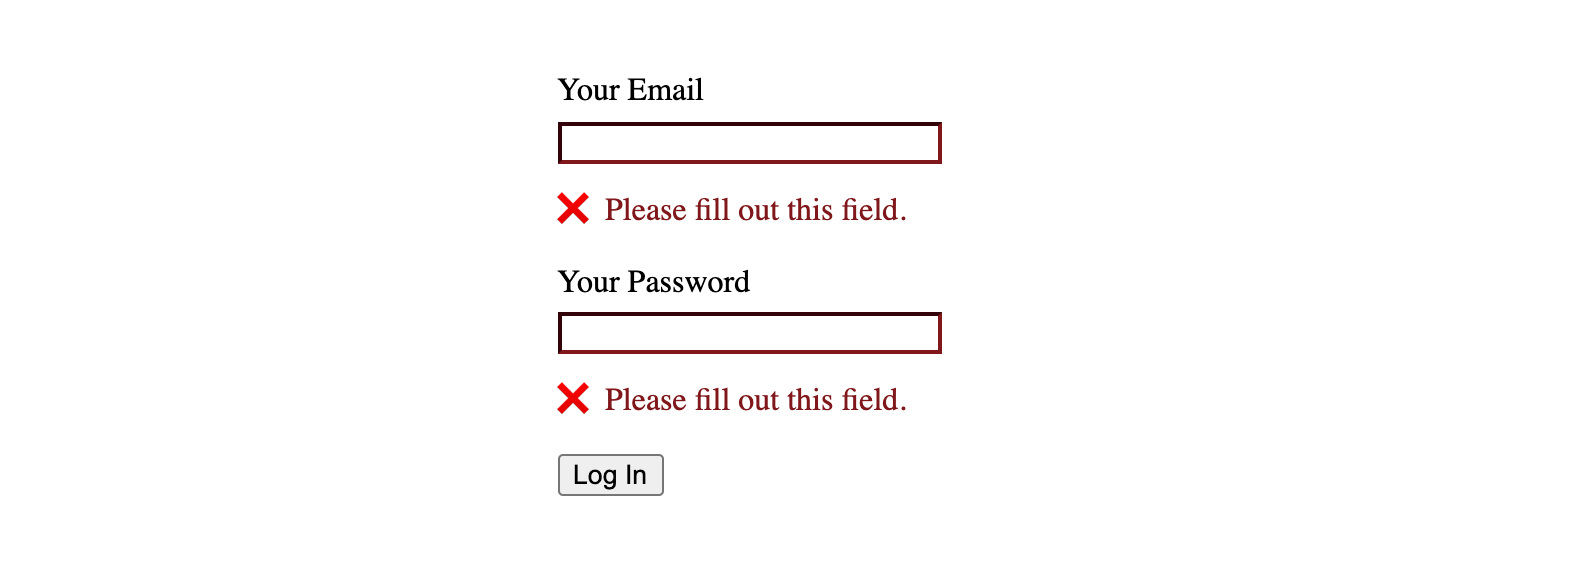 Custom form errors underneath email and password inputs